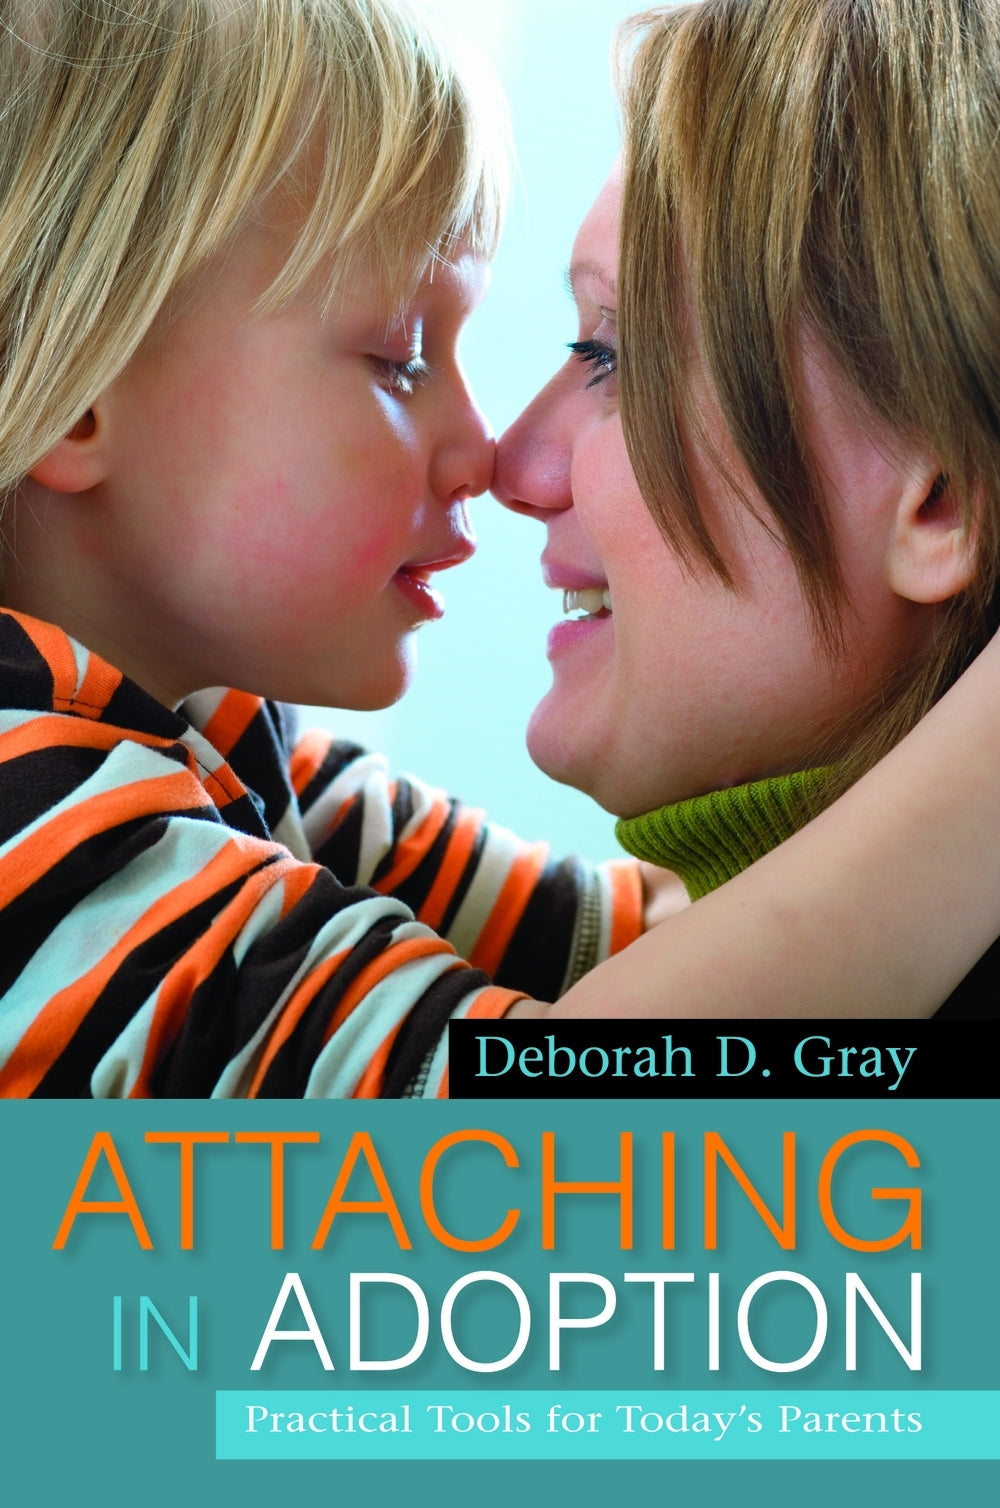 Attaching in Adoption by Deborah D. Gray